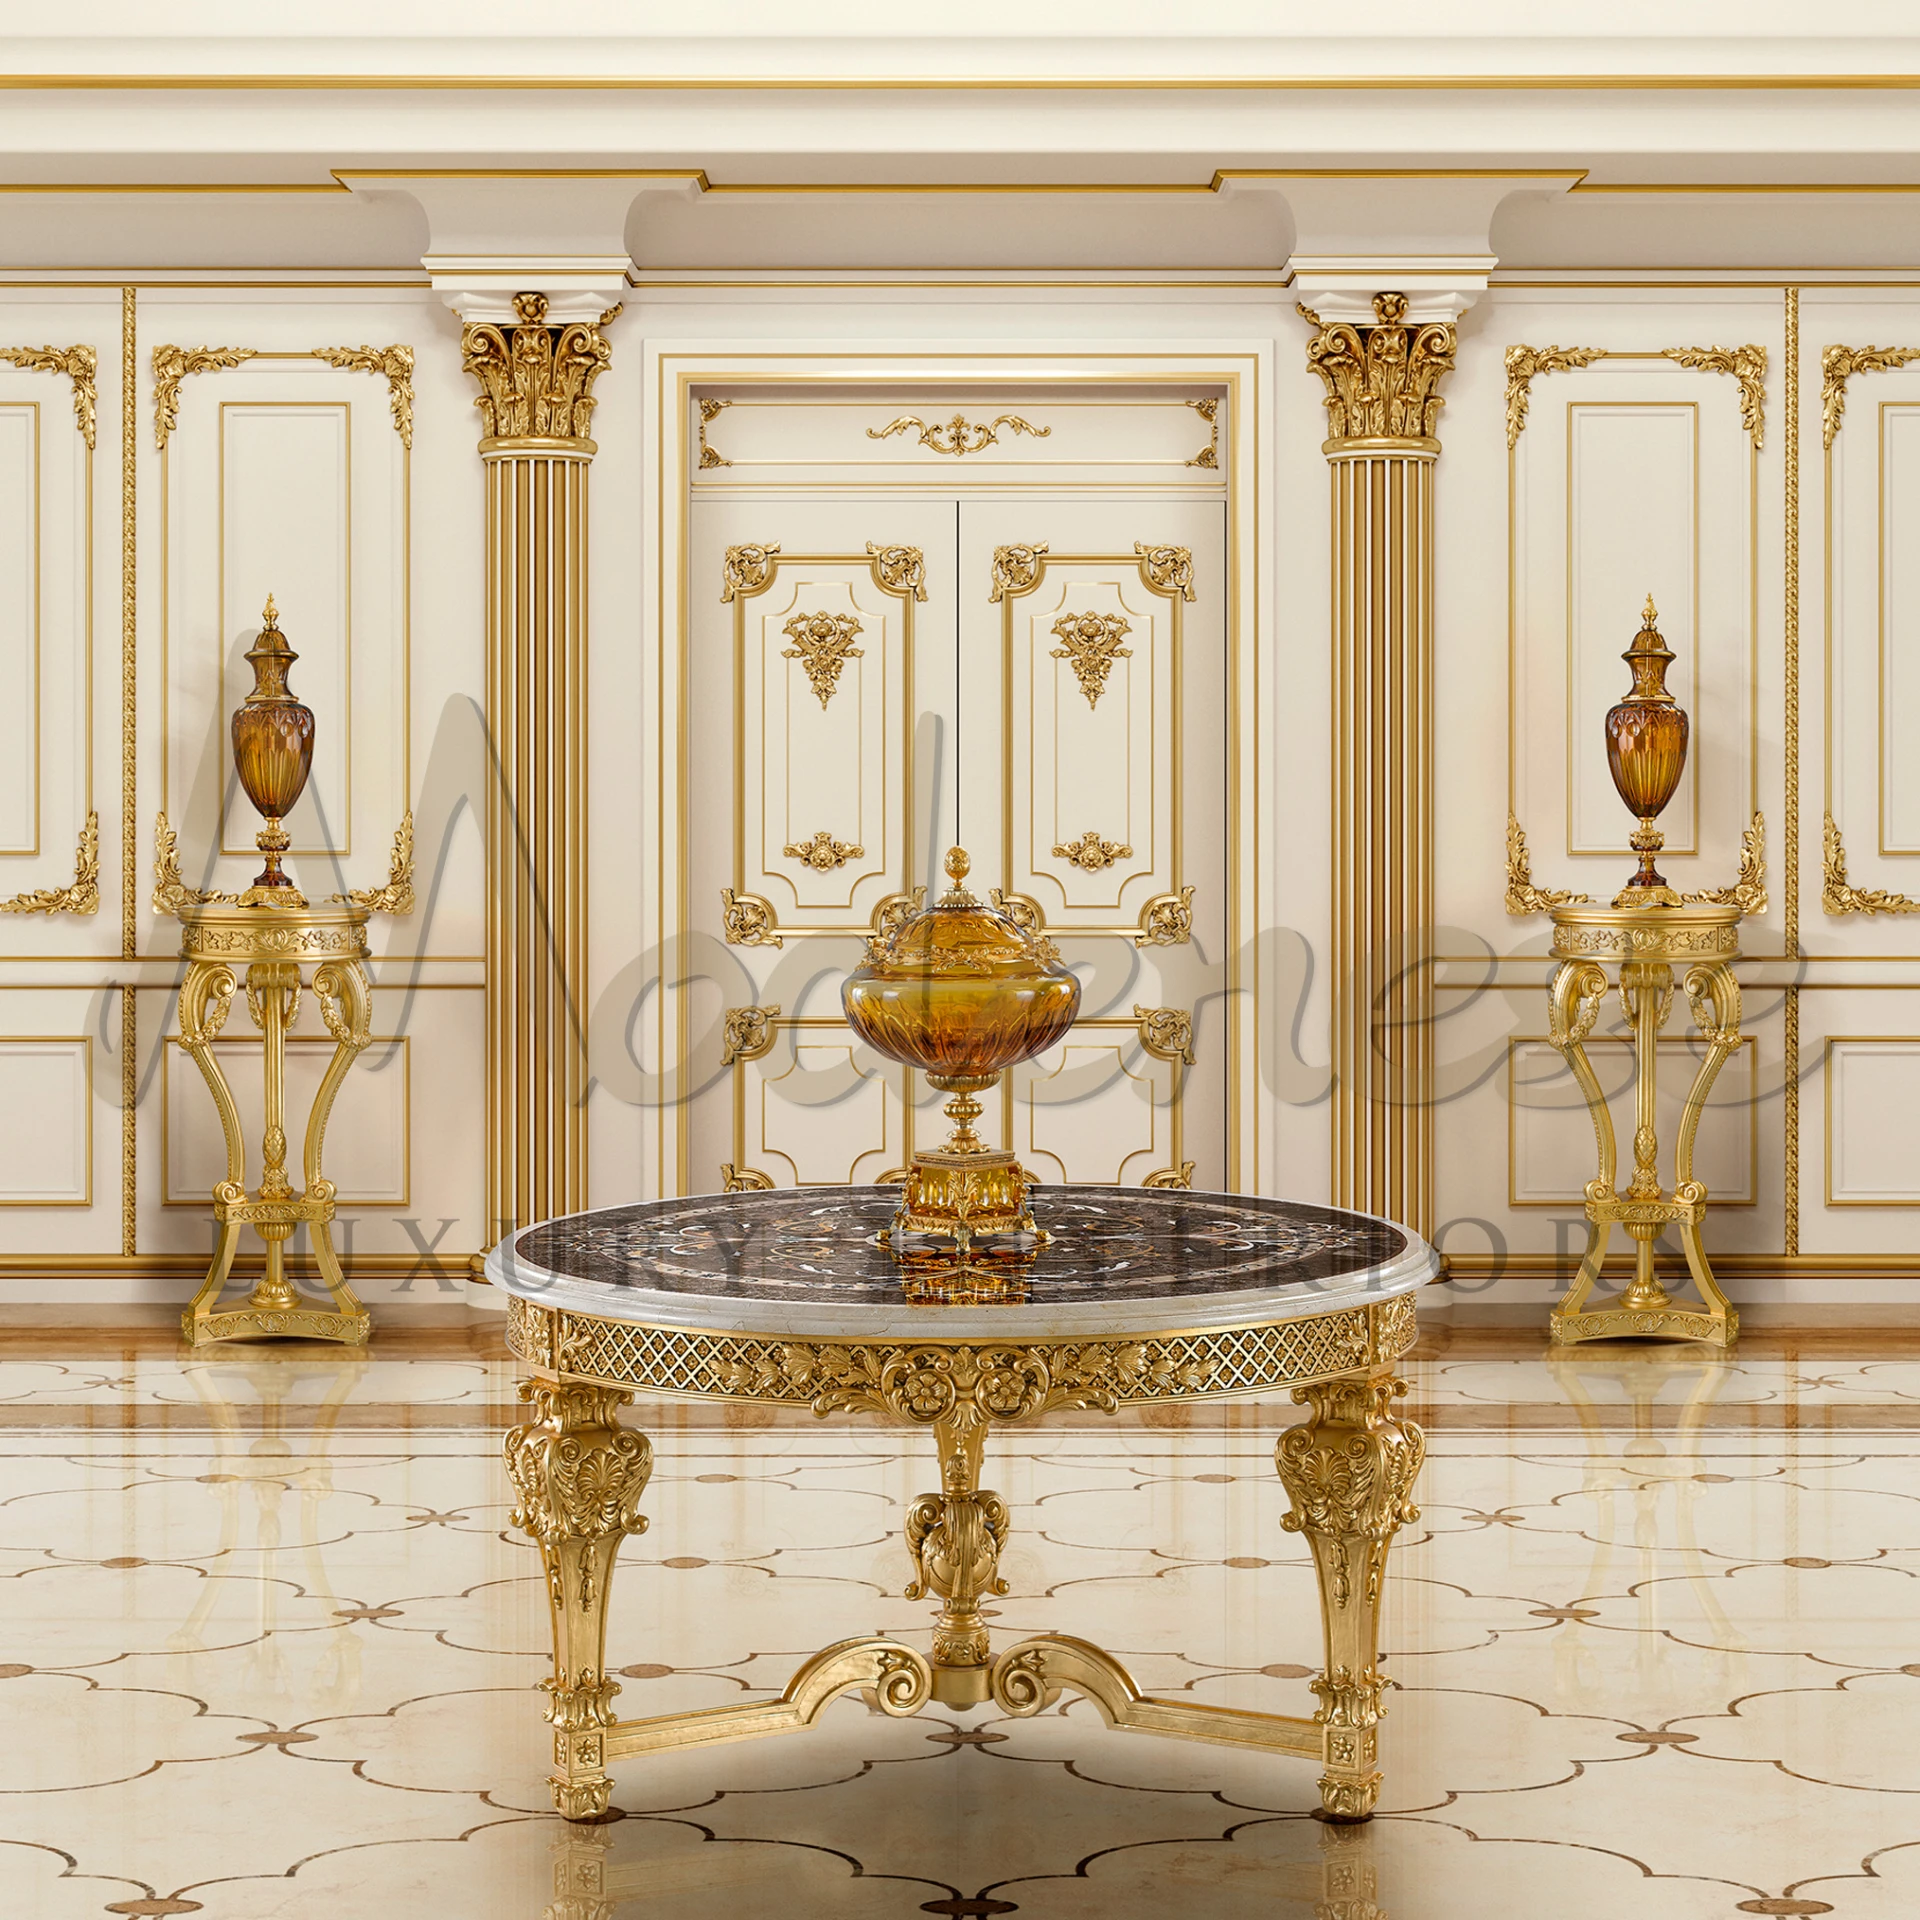 "Chic and glamorous Royal Baroque Central Table, combining functional storage with a luxurious round table design for sophisticated spaces.